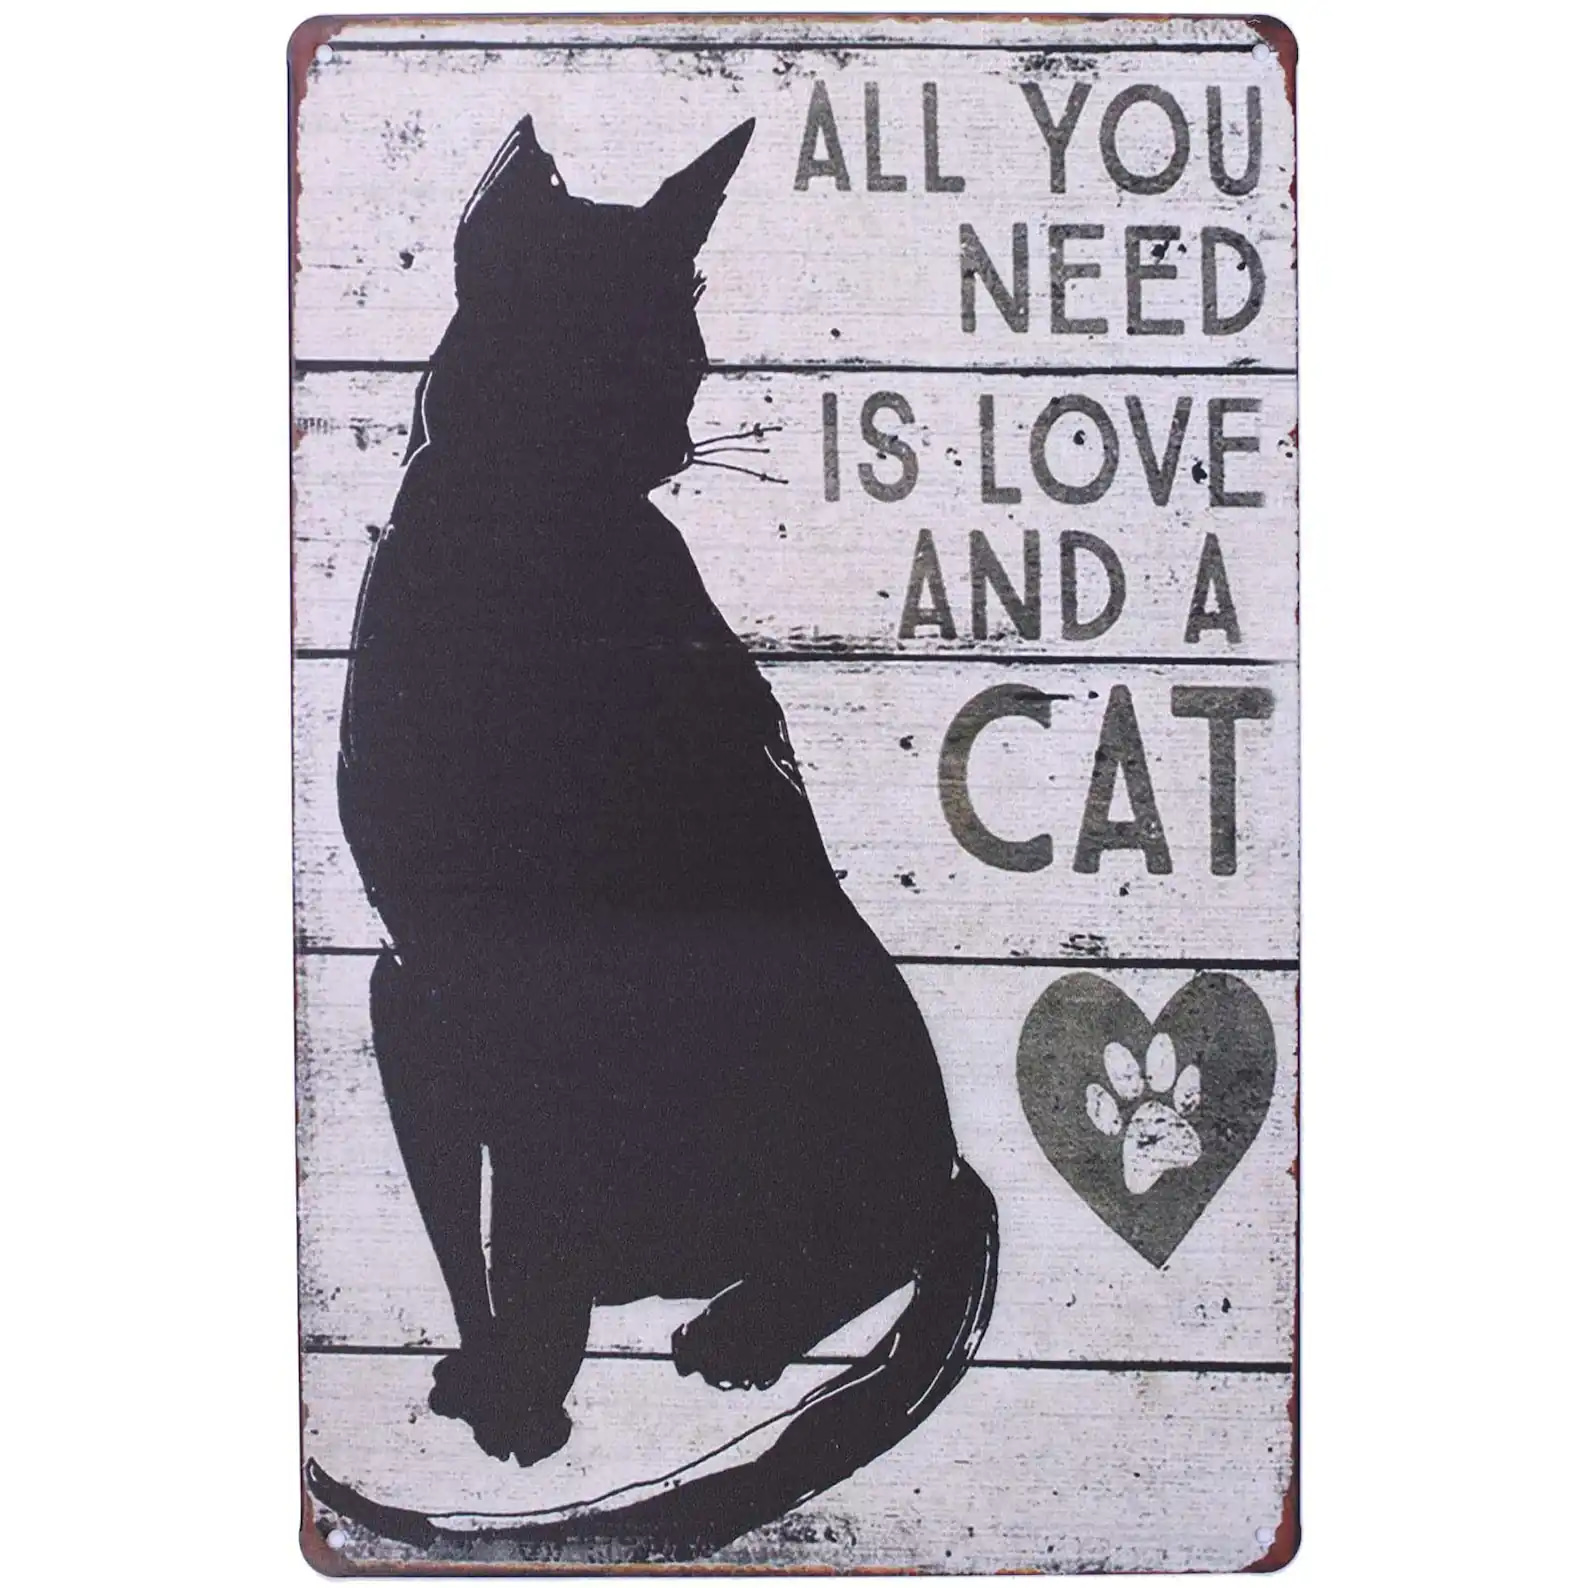 All You Need Is Love And A Cat Vintage Art Poster Home Wall Decor Metal Sign